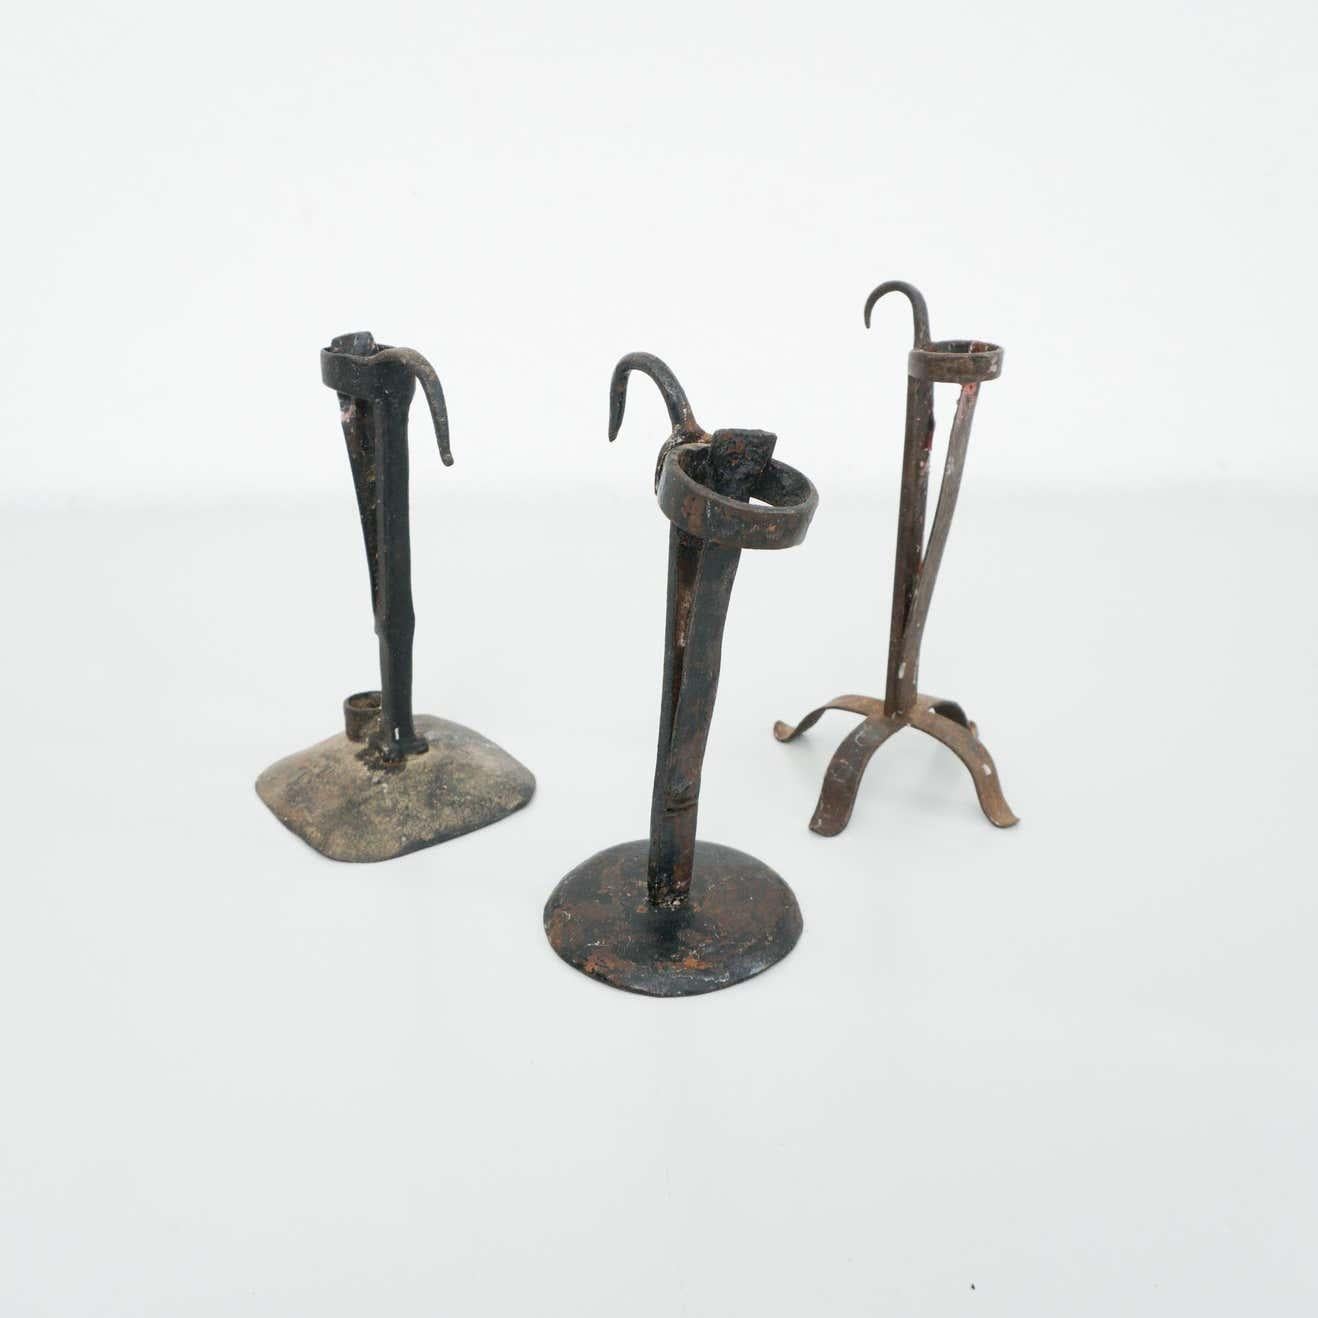 Set of three rustic metal candle holders, circa 1930
By unknown manufacturer. Spain.

In original condition, with minor wear consistent with age and use, preserving a beautiful patina.
 